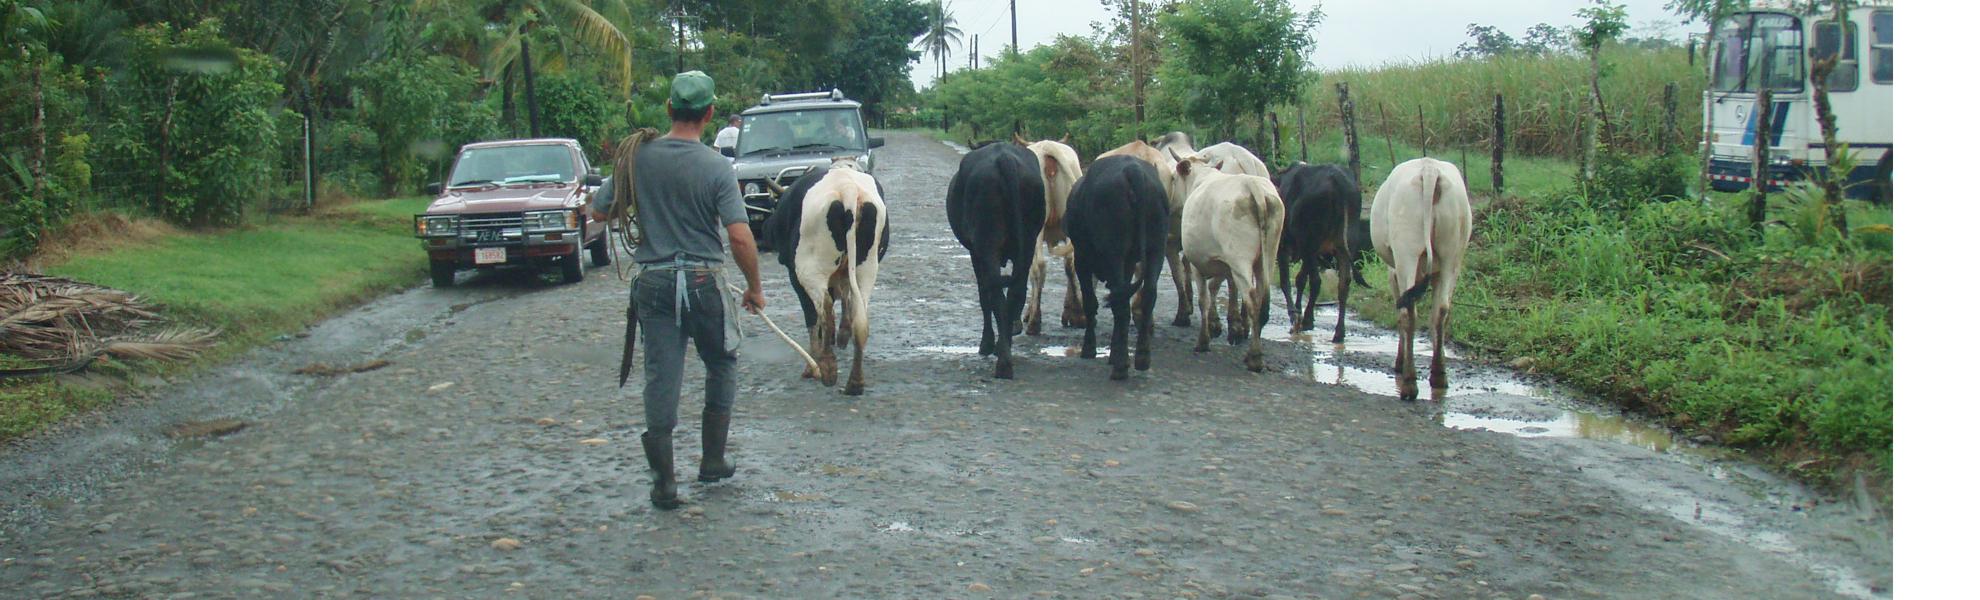 Cows Have Priority on Roads